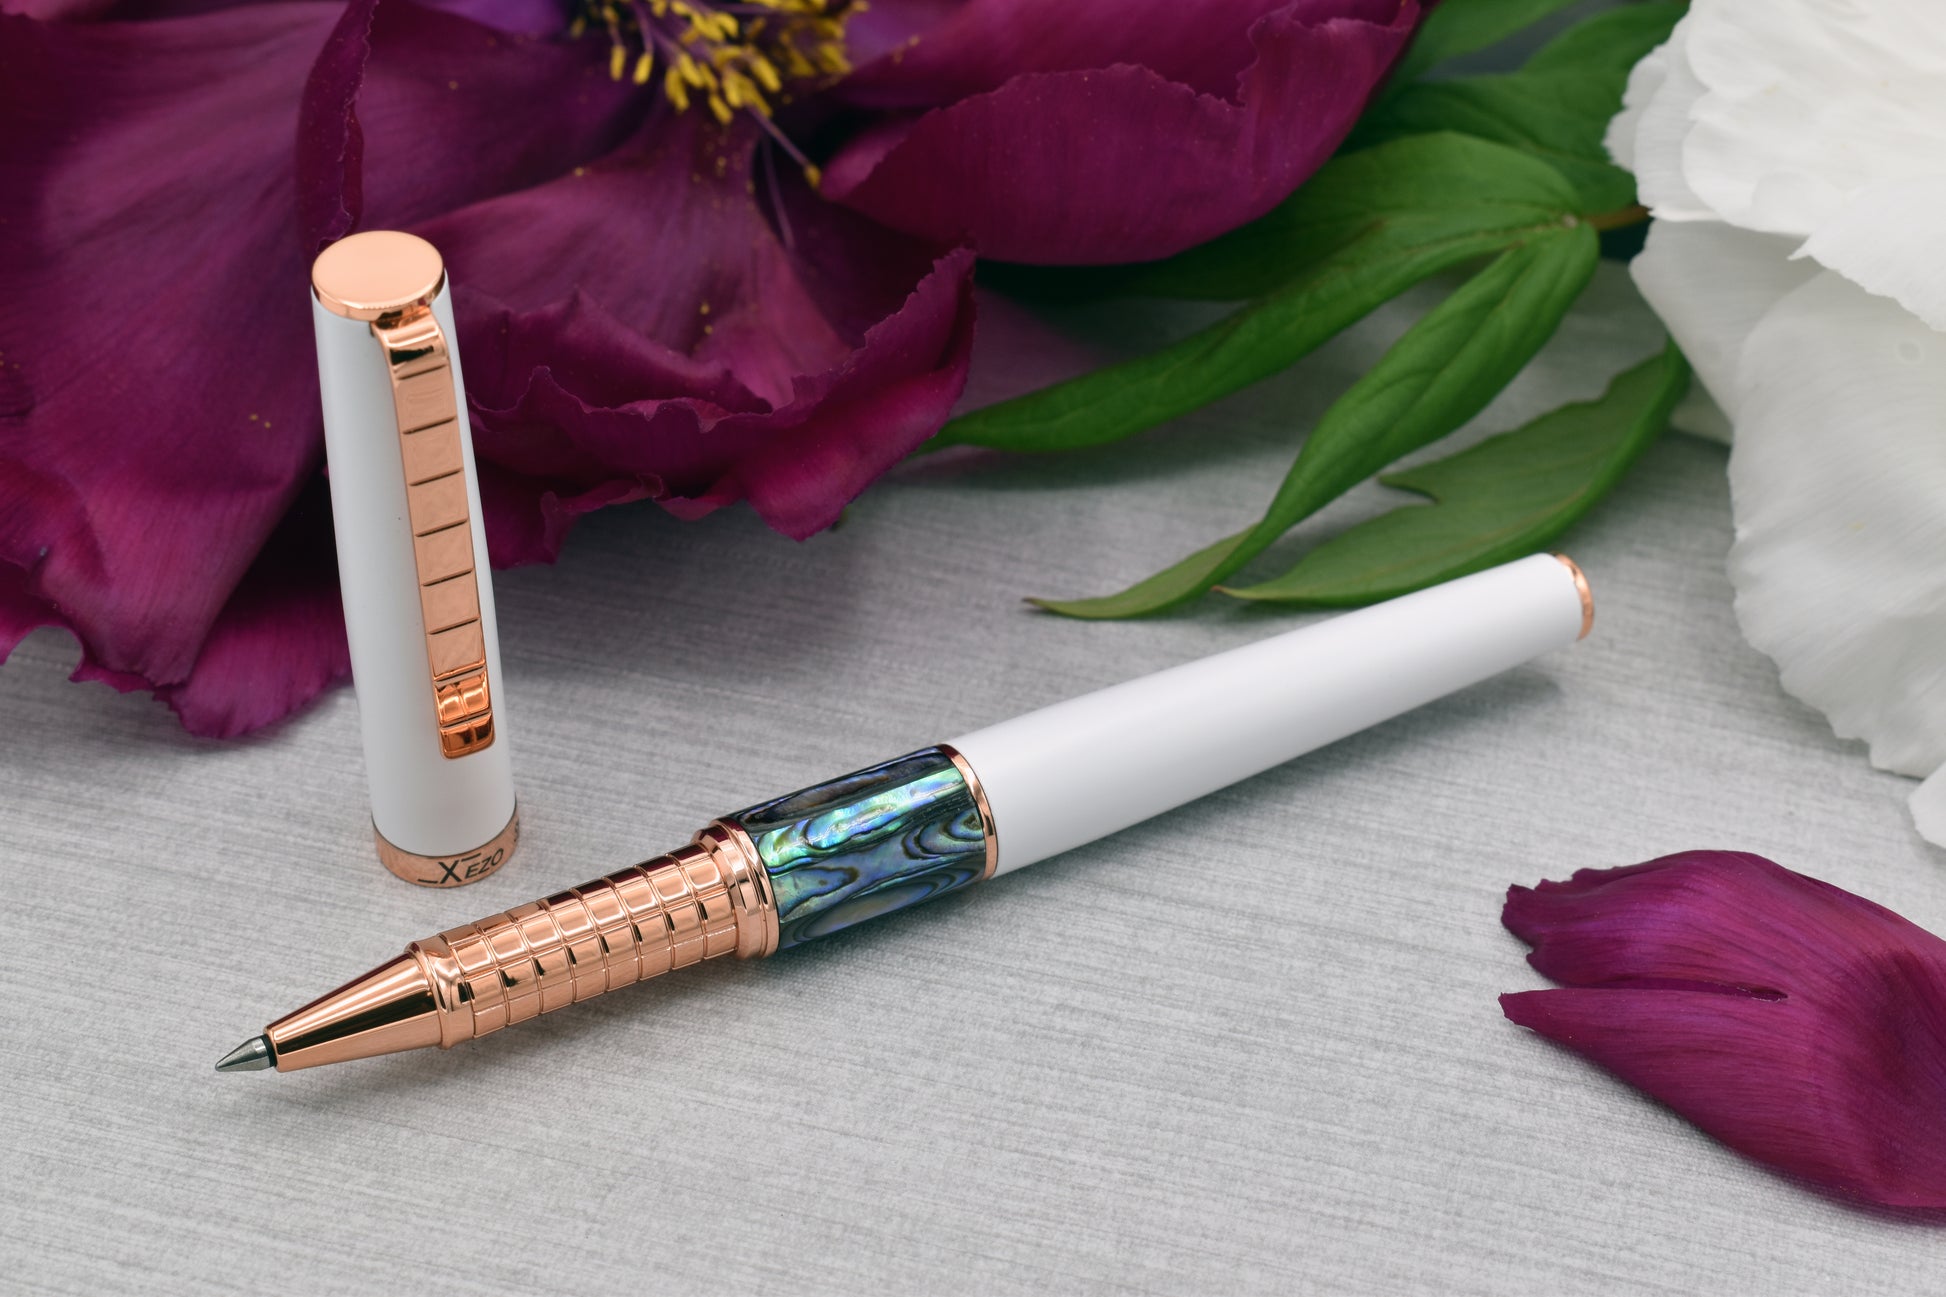 Speed Master White R-ARG Rollerball pen with a peony flower